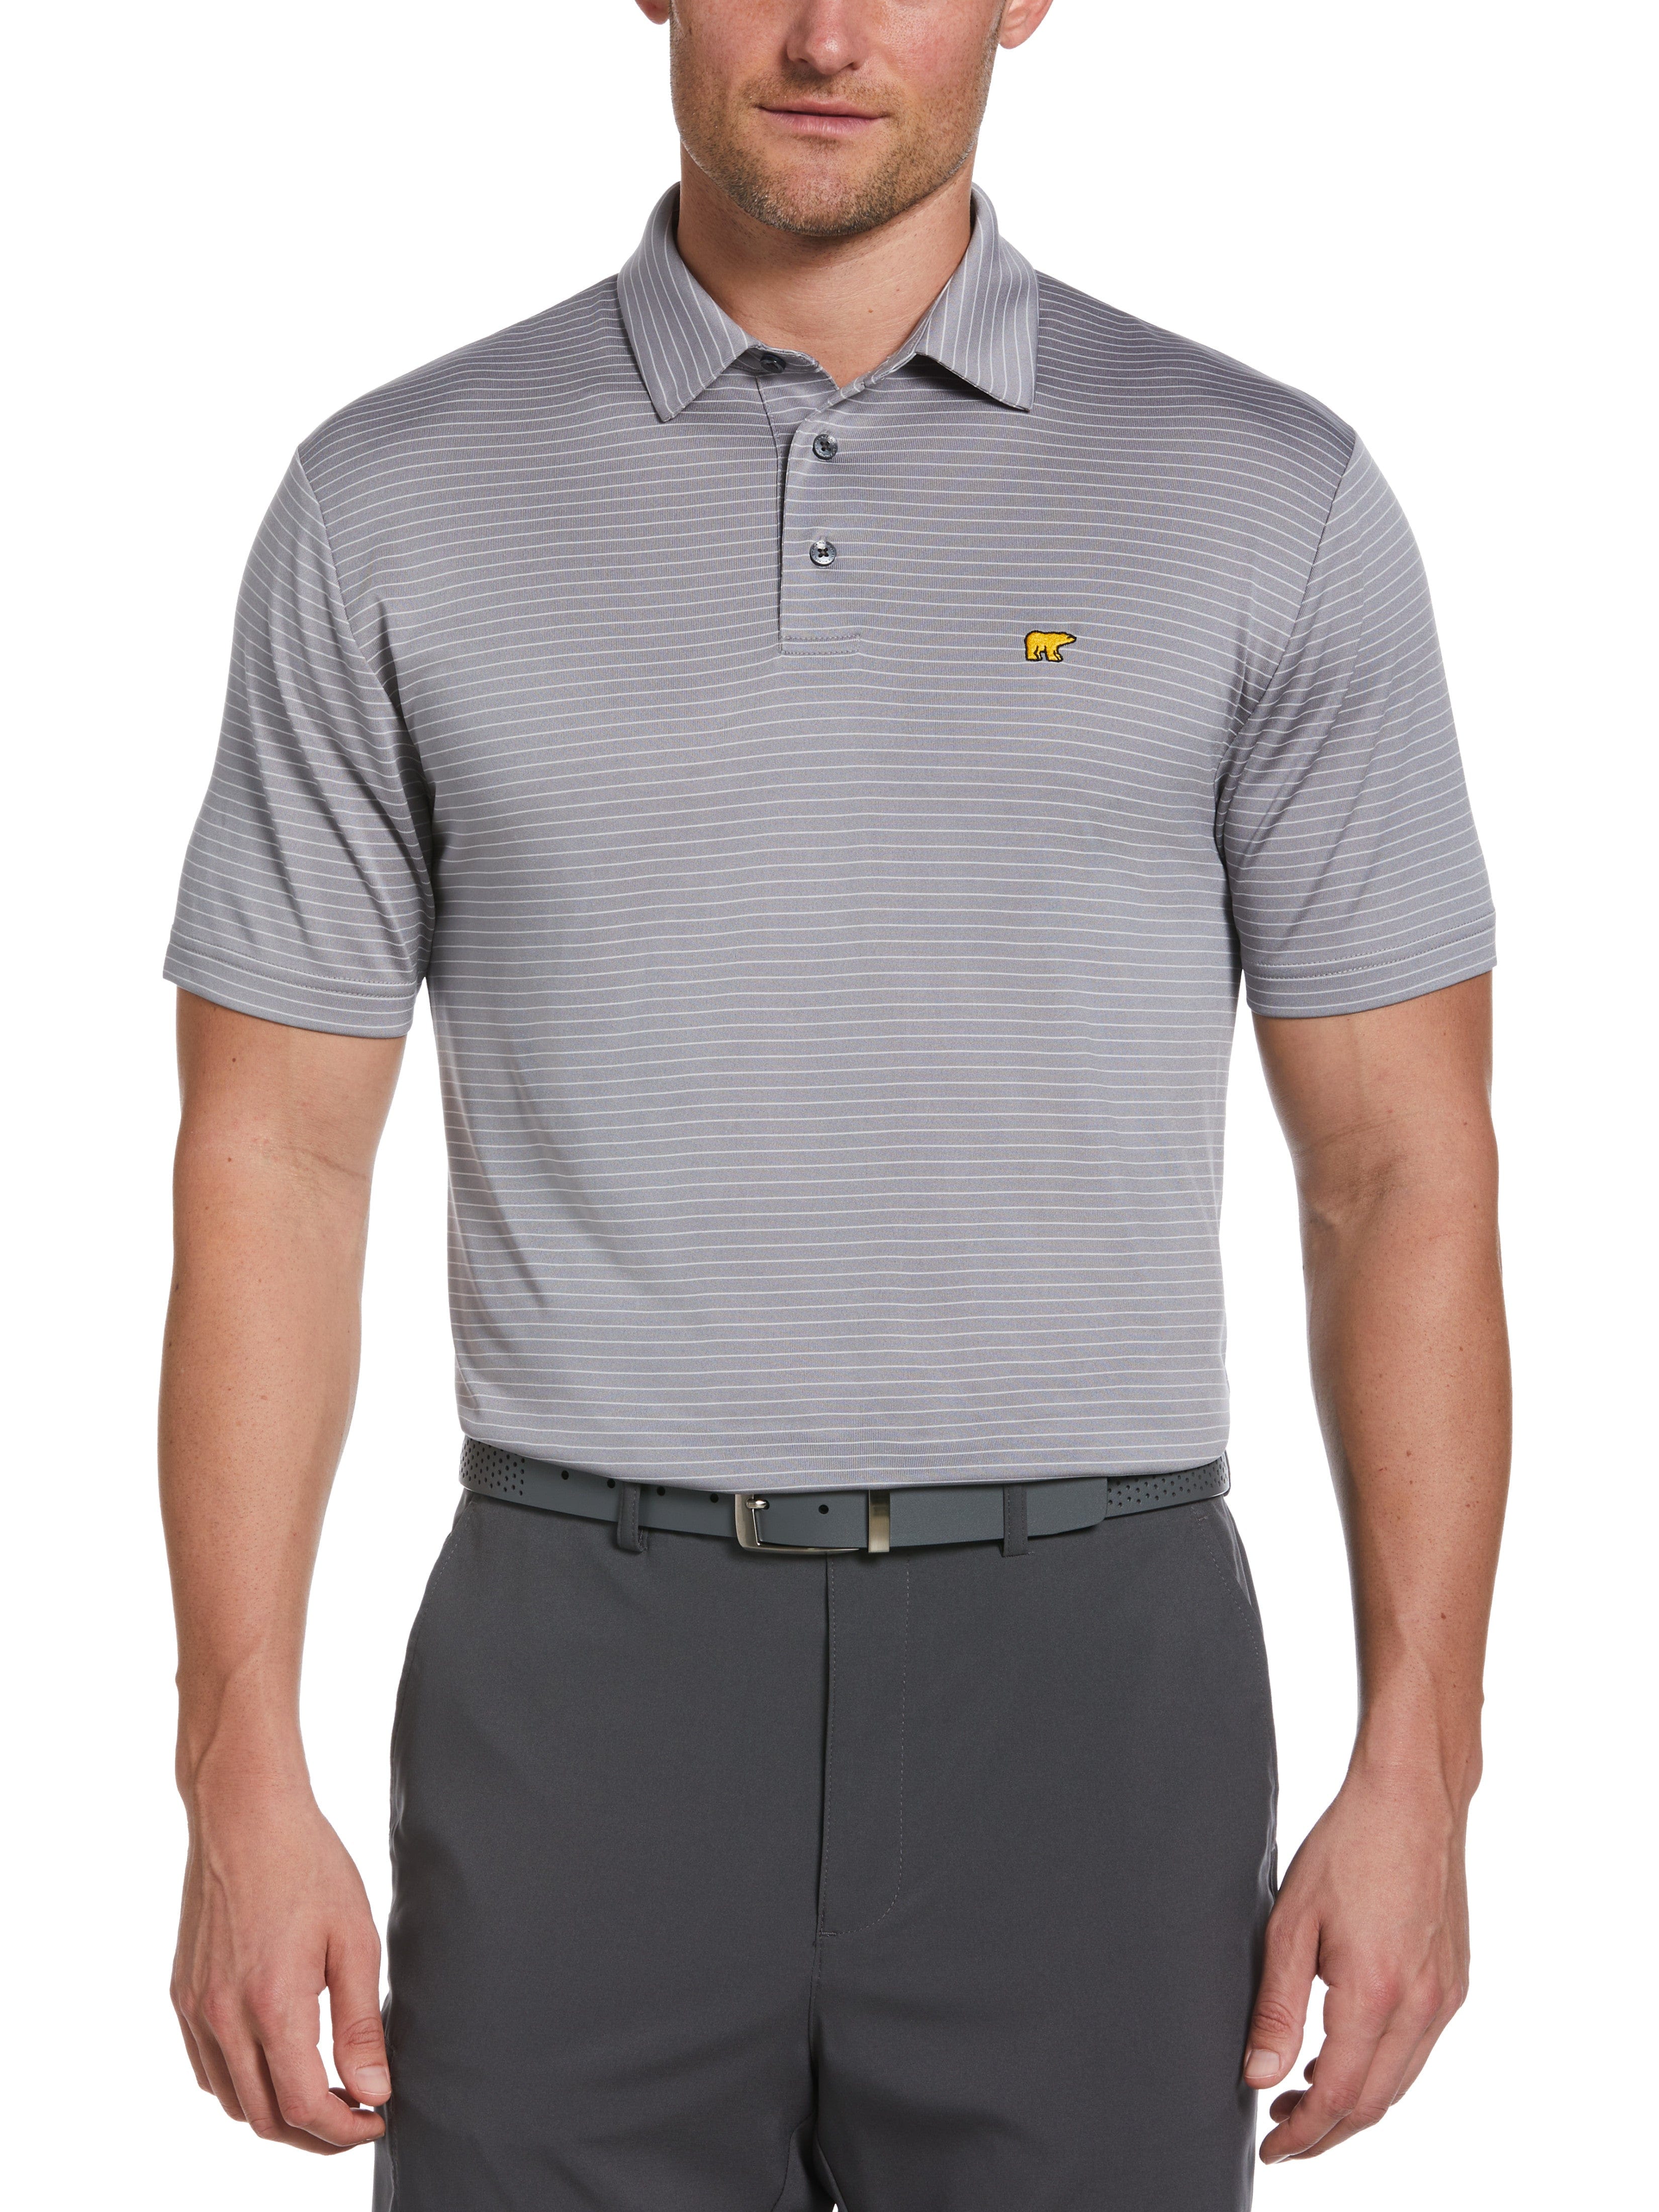 Jack Nicklaus Mens Two Color Stripe Golf Polo Shirt, Size 2XL, Tradewinds Gray, 100% Polyester | Golf Apparel Shop